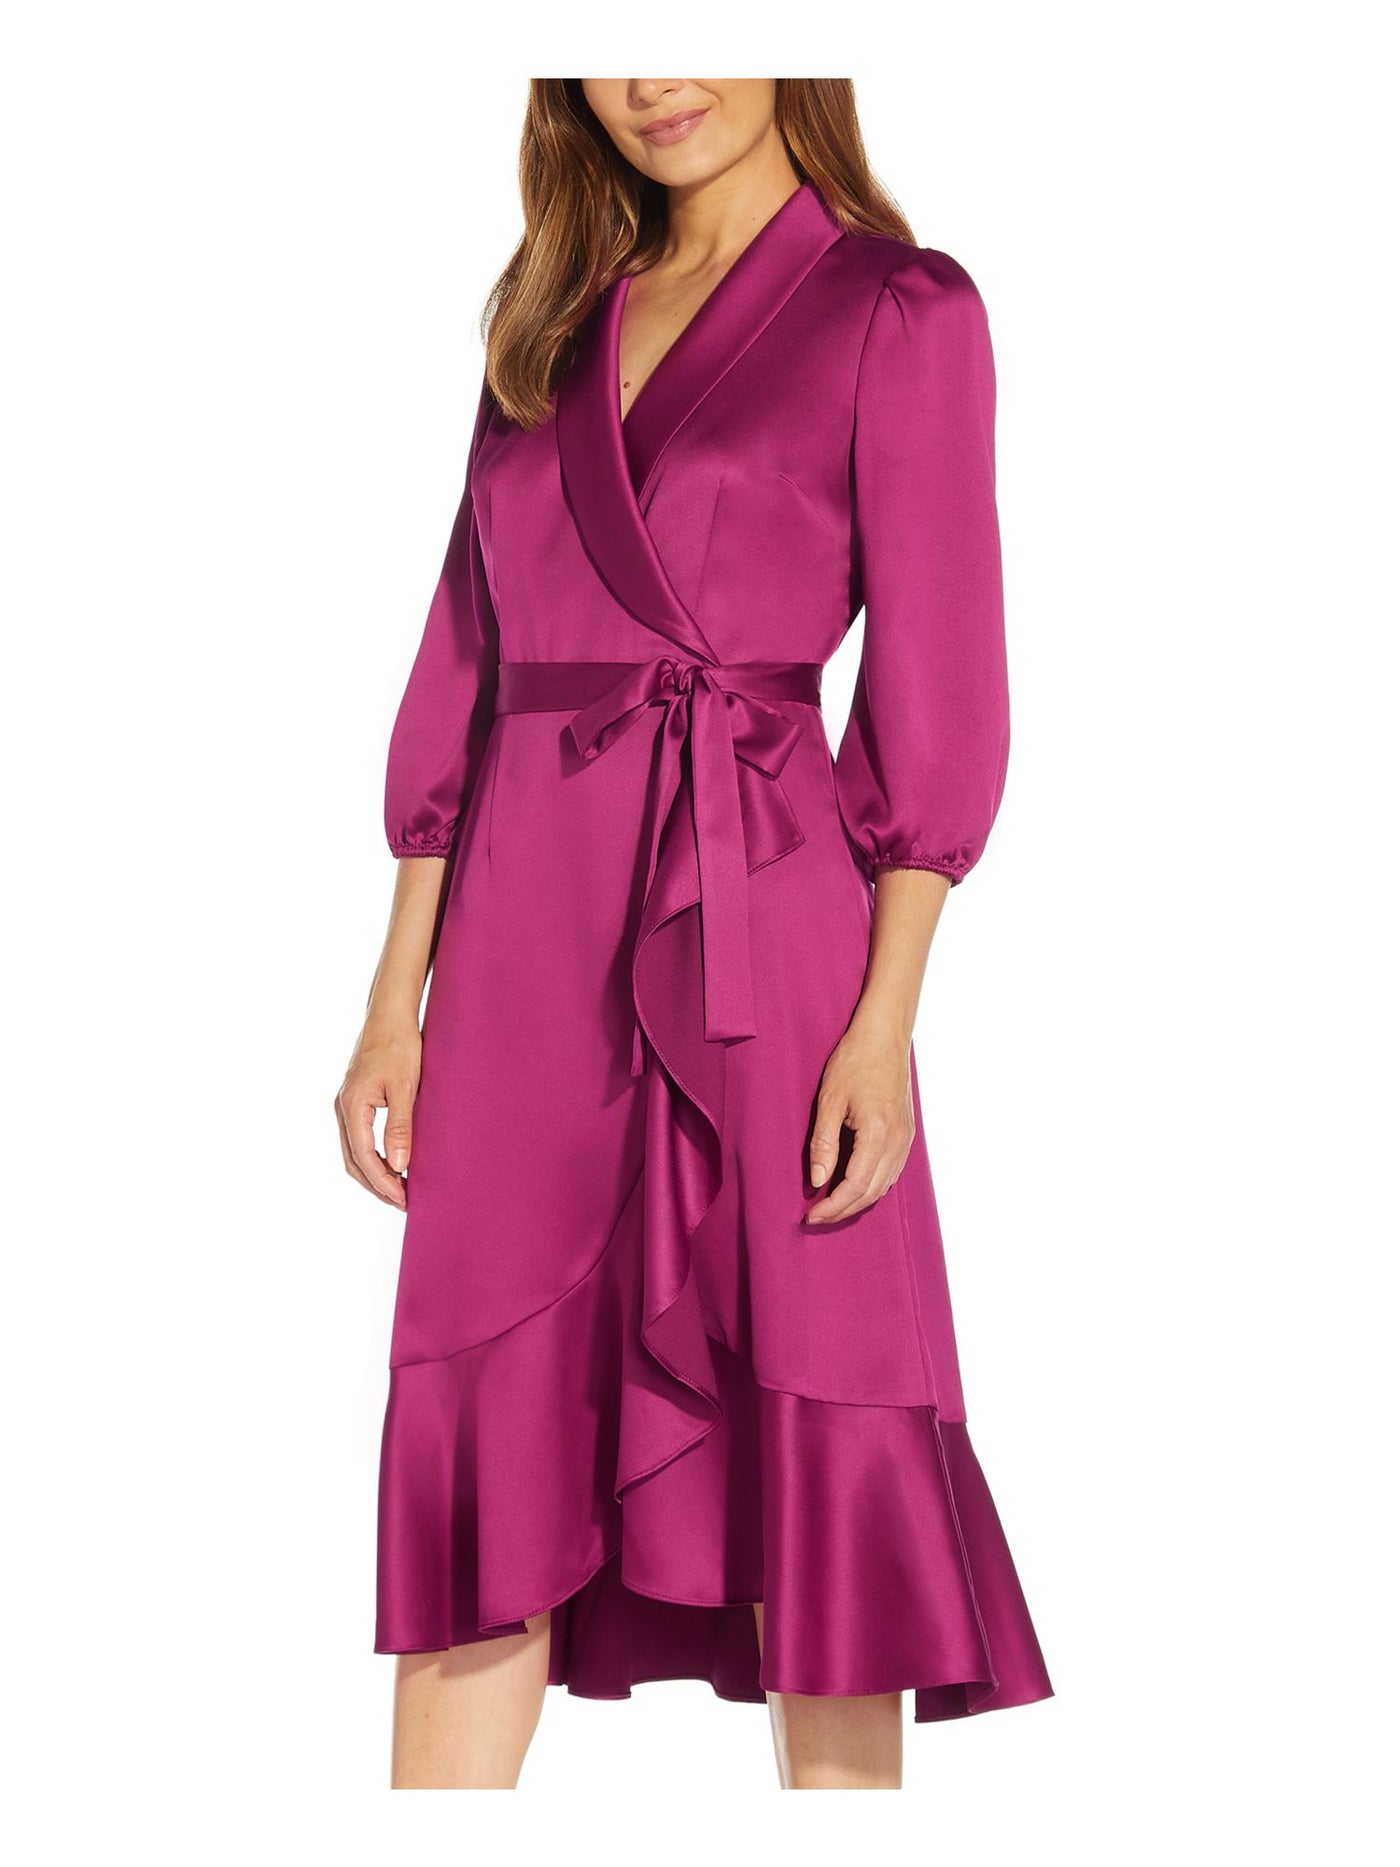 ADRIANNA PAPELL Womens Maroon Ruffled Zippered Tie Waist Lined 3/4 Sleeve Shawl Collar Below The Knee Wear To Work Faux Wrap Dress 0